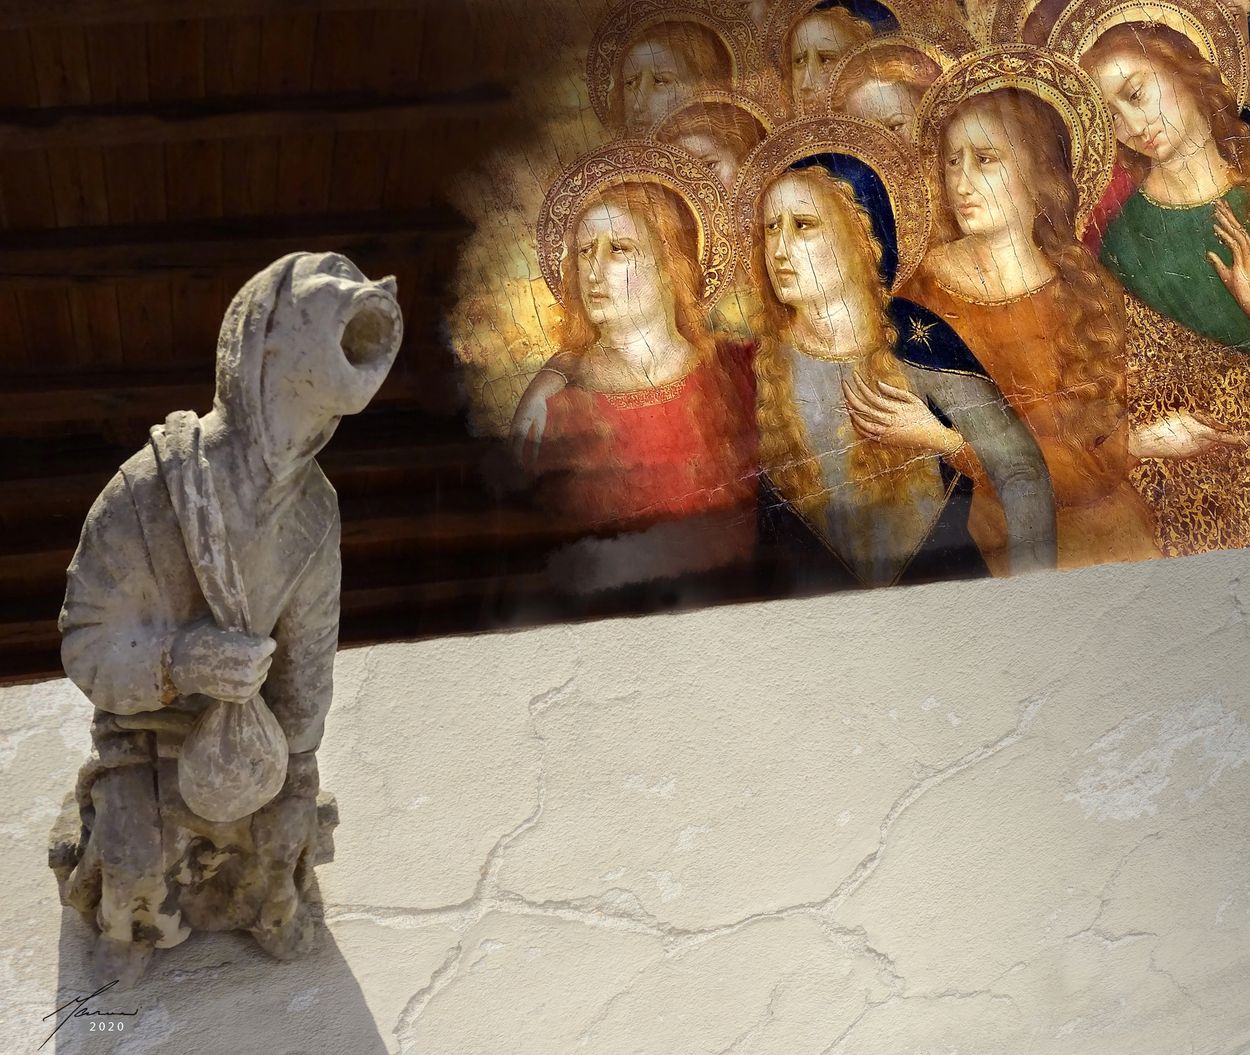 French Stone statue vocalizes to Christian Saints. Photomontage by artist and photographer Marvin Be